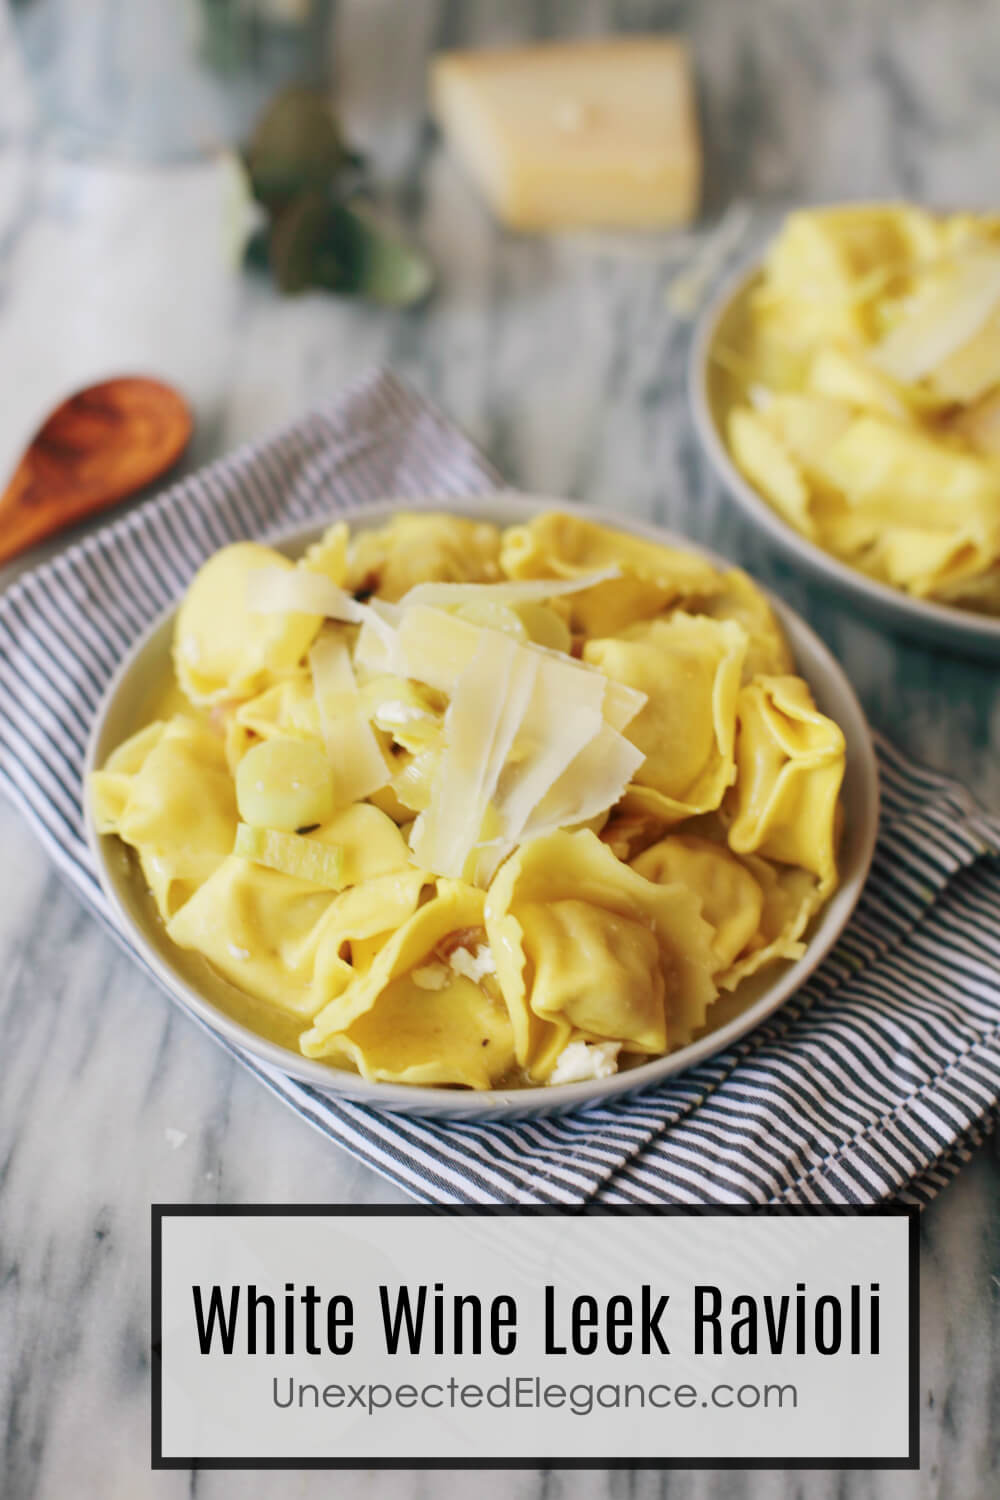 This super easy and quick White Wine Leek Ravioli dish is perfect for weeknight dinner when you have a million things going on. No one will know how simple is to whip up!